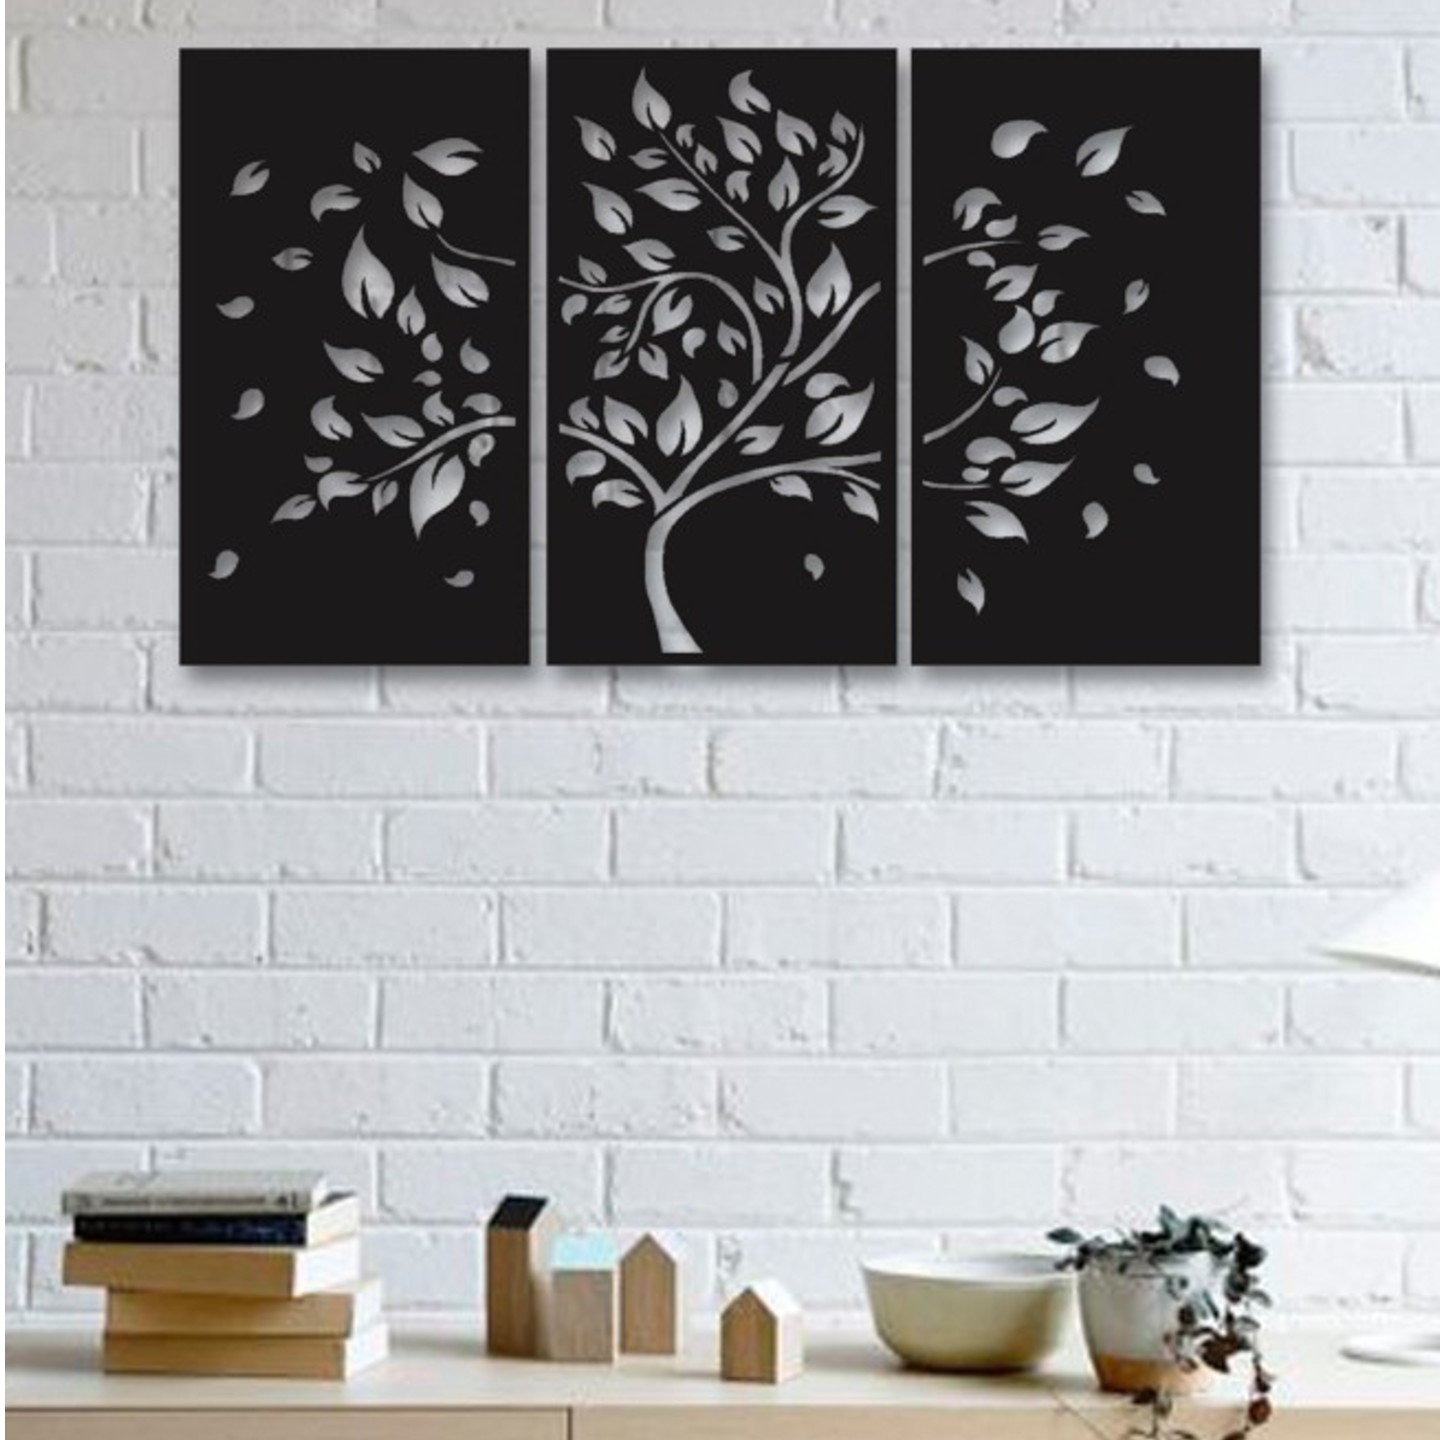 Leaves Wall Panel - Set of 3